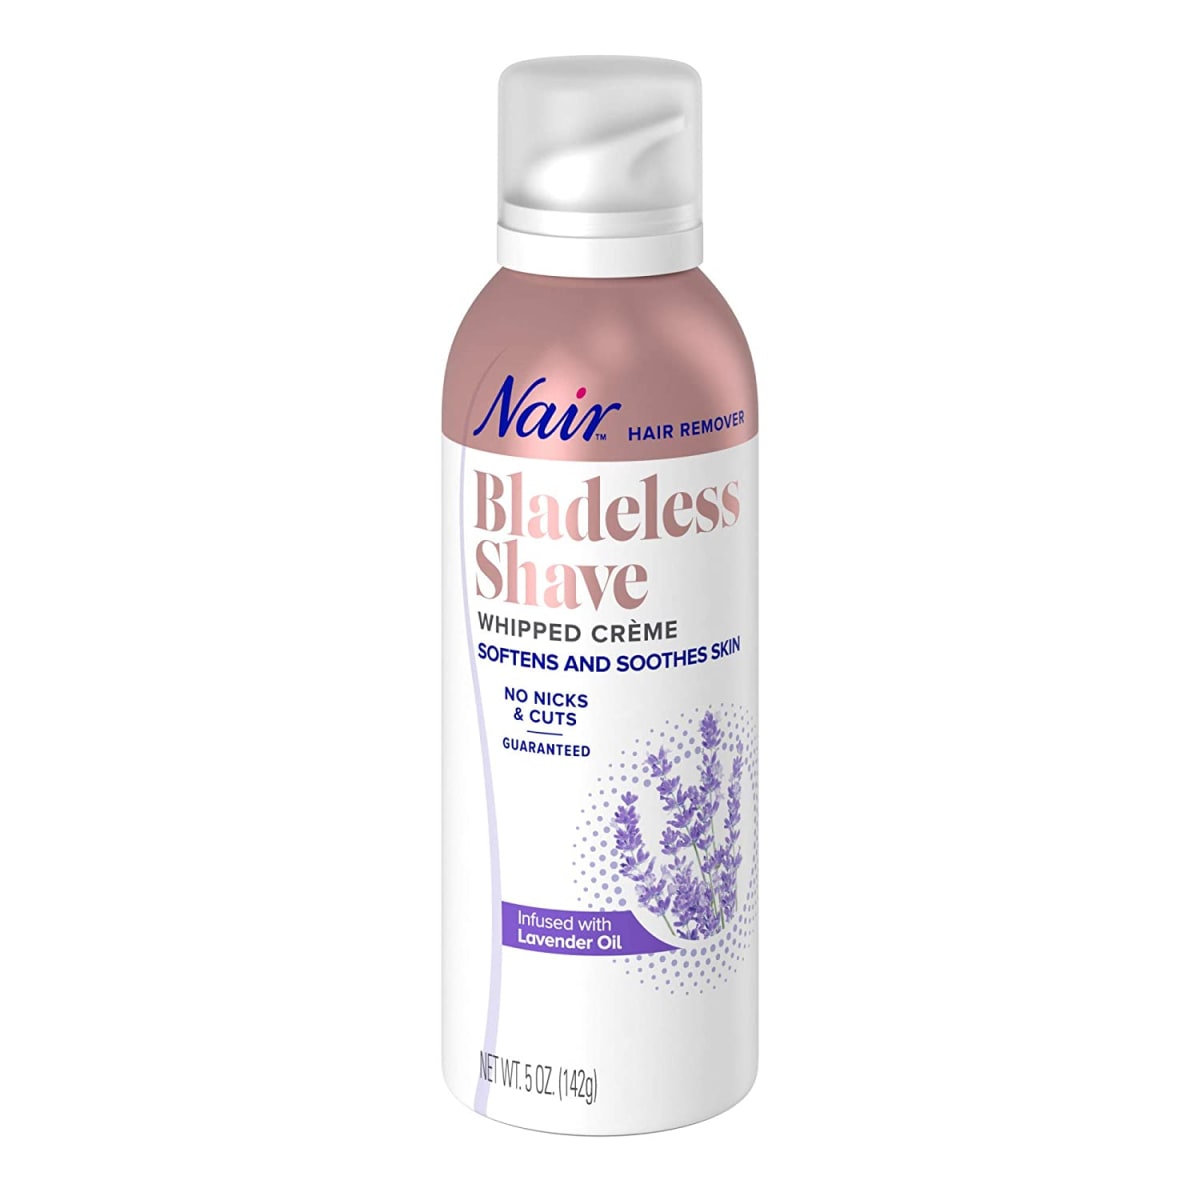 Nair Hair Remover Bladeless Shave Whipped Crème